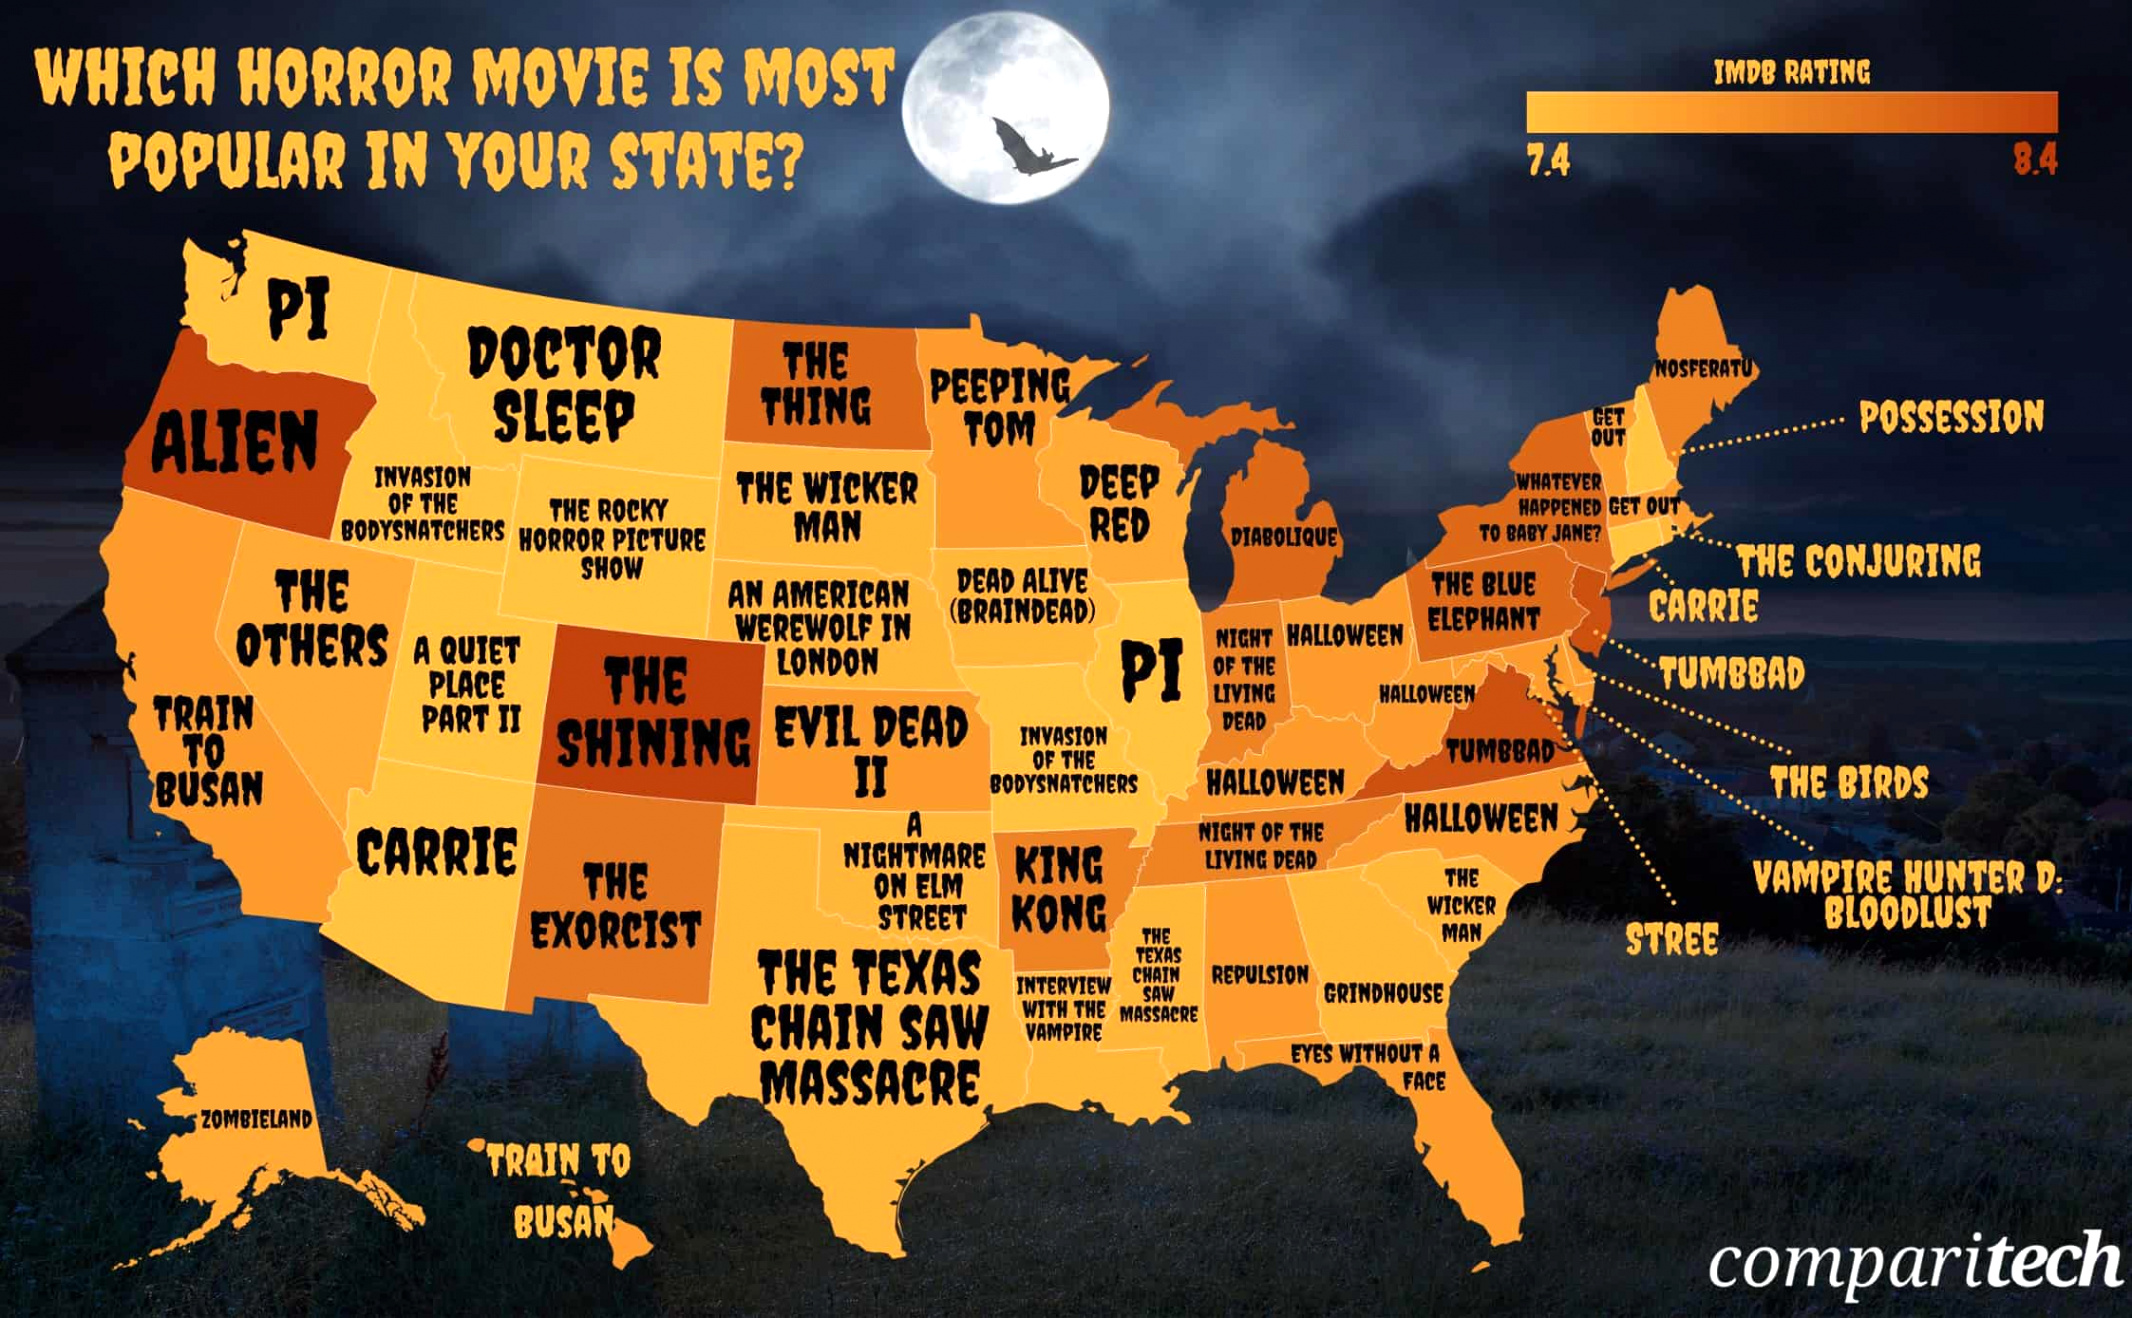 Cheap Vpn In torrance Nm Dans the Most Popular Halloween Movies by State 2022 - Comparitech